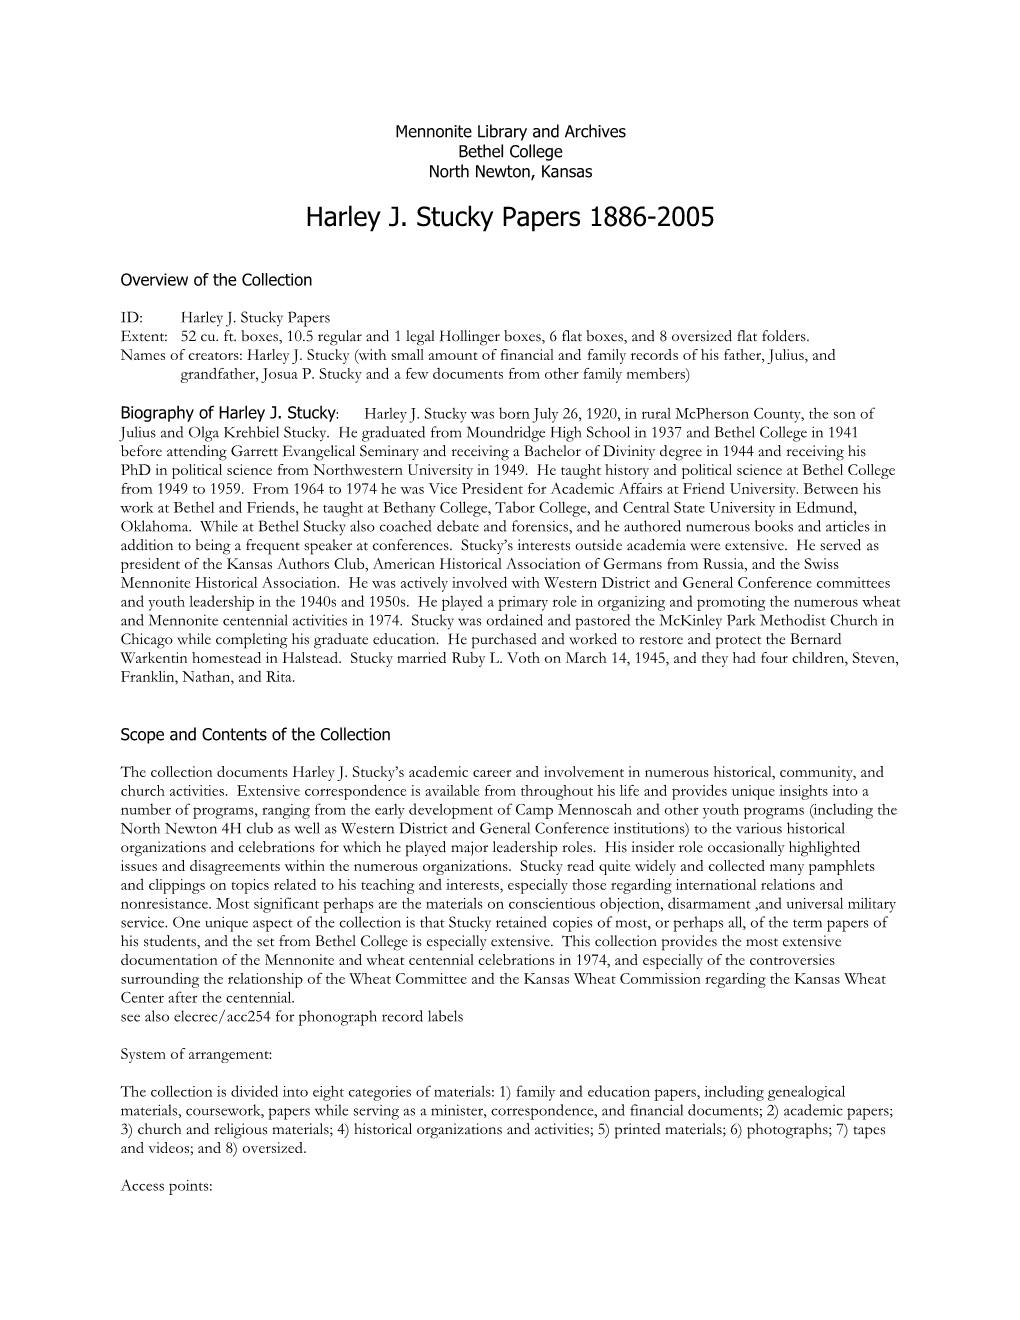 Harley J. Stucky Papers 1886-2005